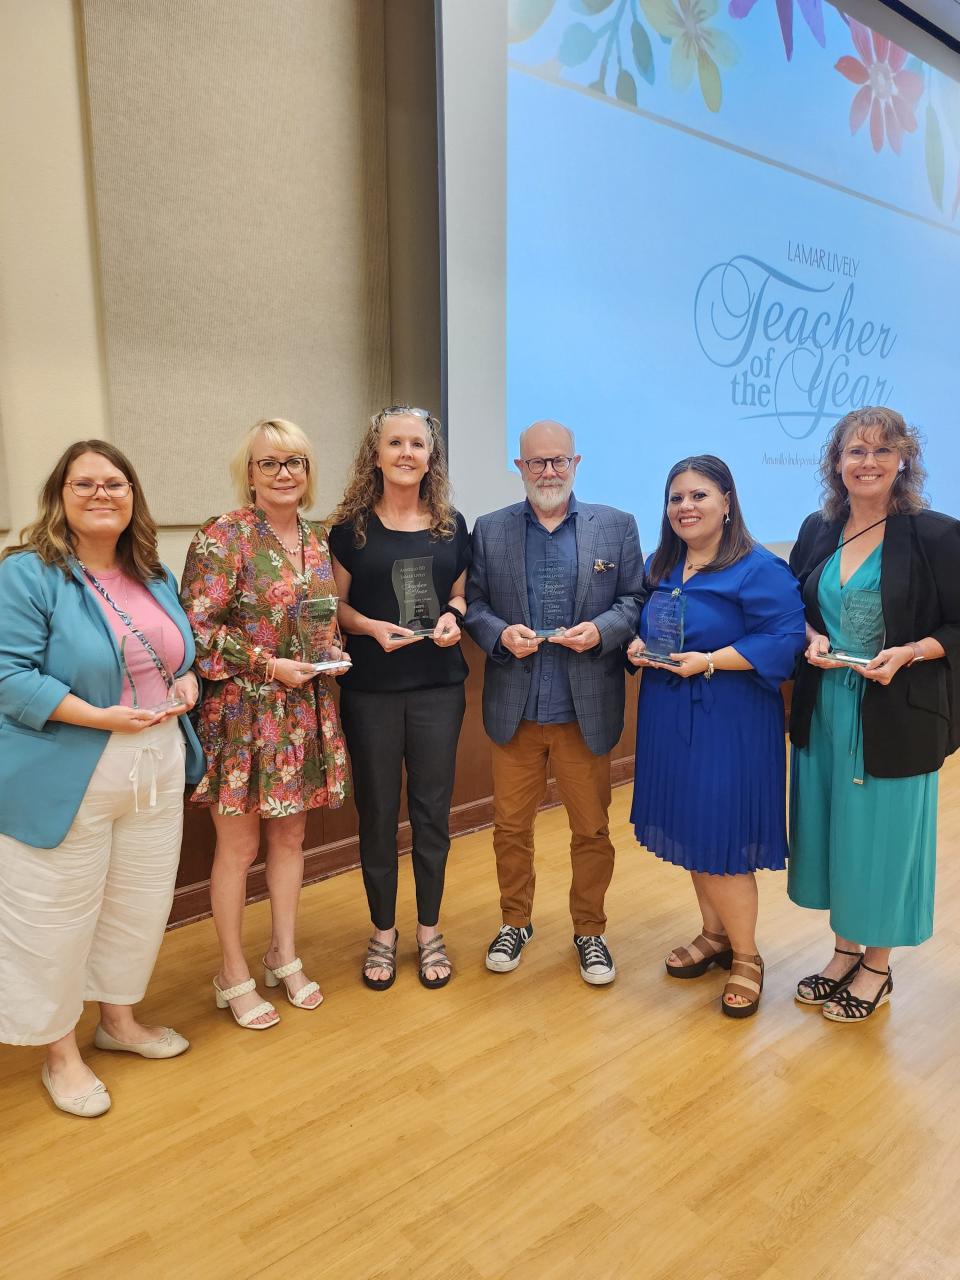 AISD announces and awards their 2024 Teacher of the Year recipients and finalists including Alice Murrah, Kristel Sexton, Kristi Leff, Larry Martin, Maria Hernandez and Courtney Greer during their Lamar Lively Teacher of the Year breakfast held Friday morning at the Polk Street Methodist Church Grand Hall.